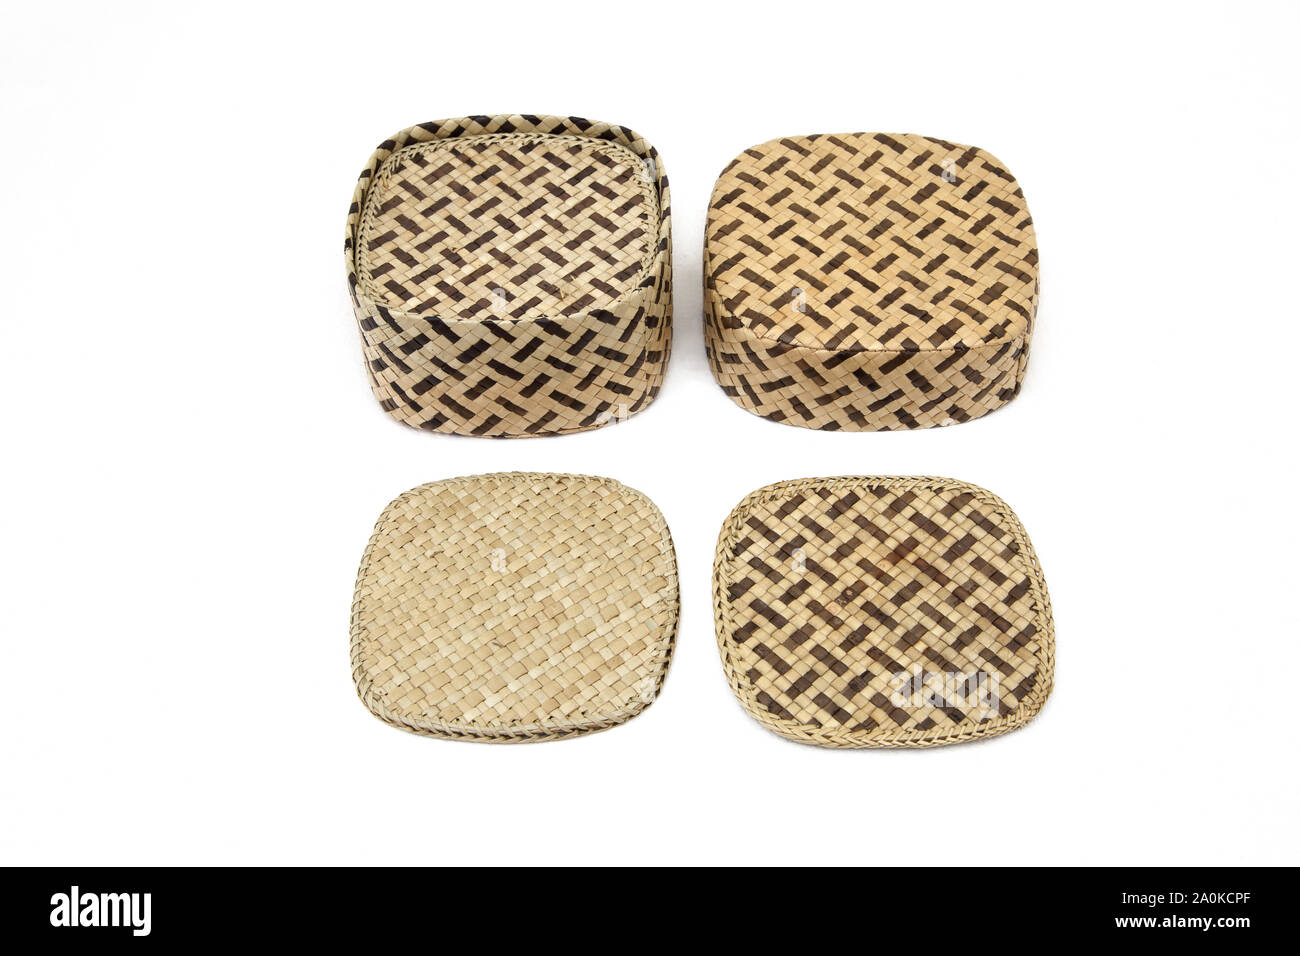 Rattan Woven Coasters and Case Stock Photo